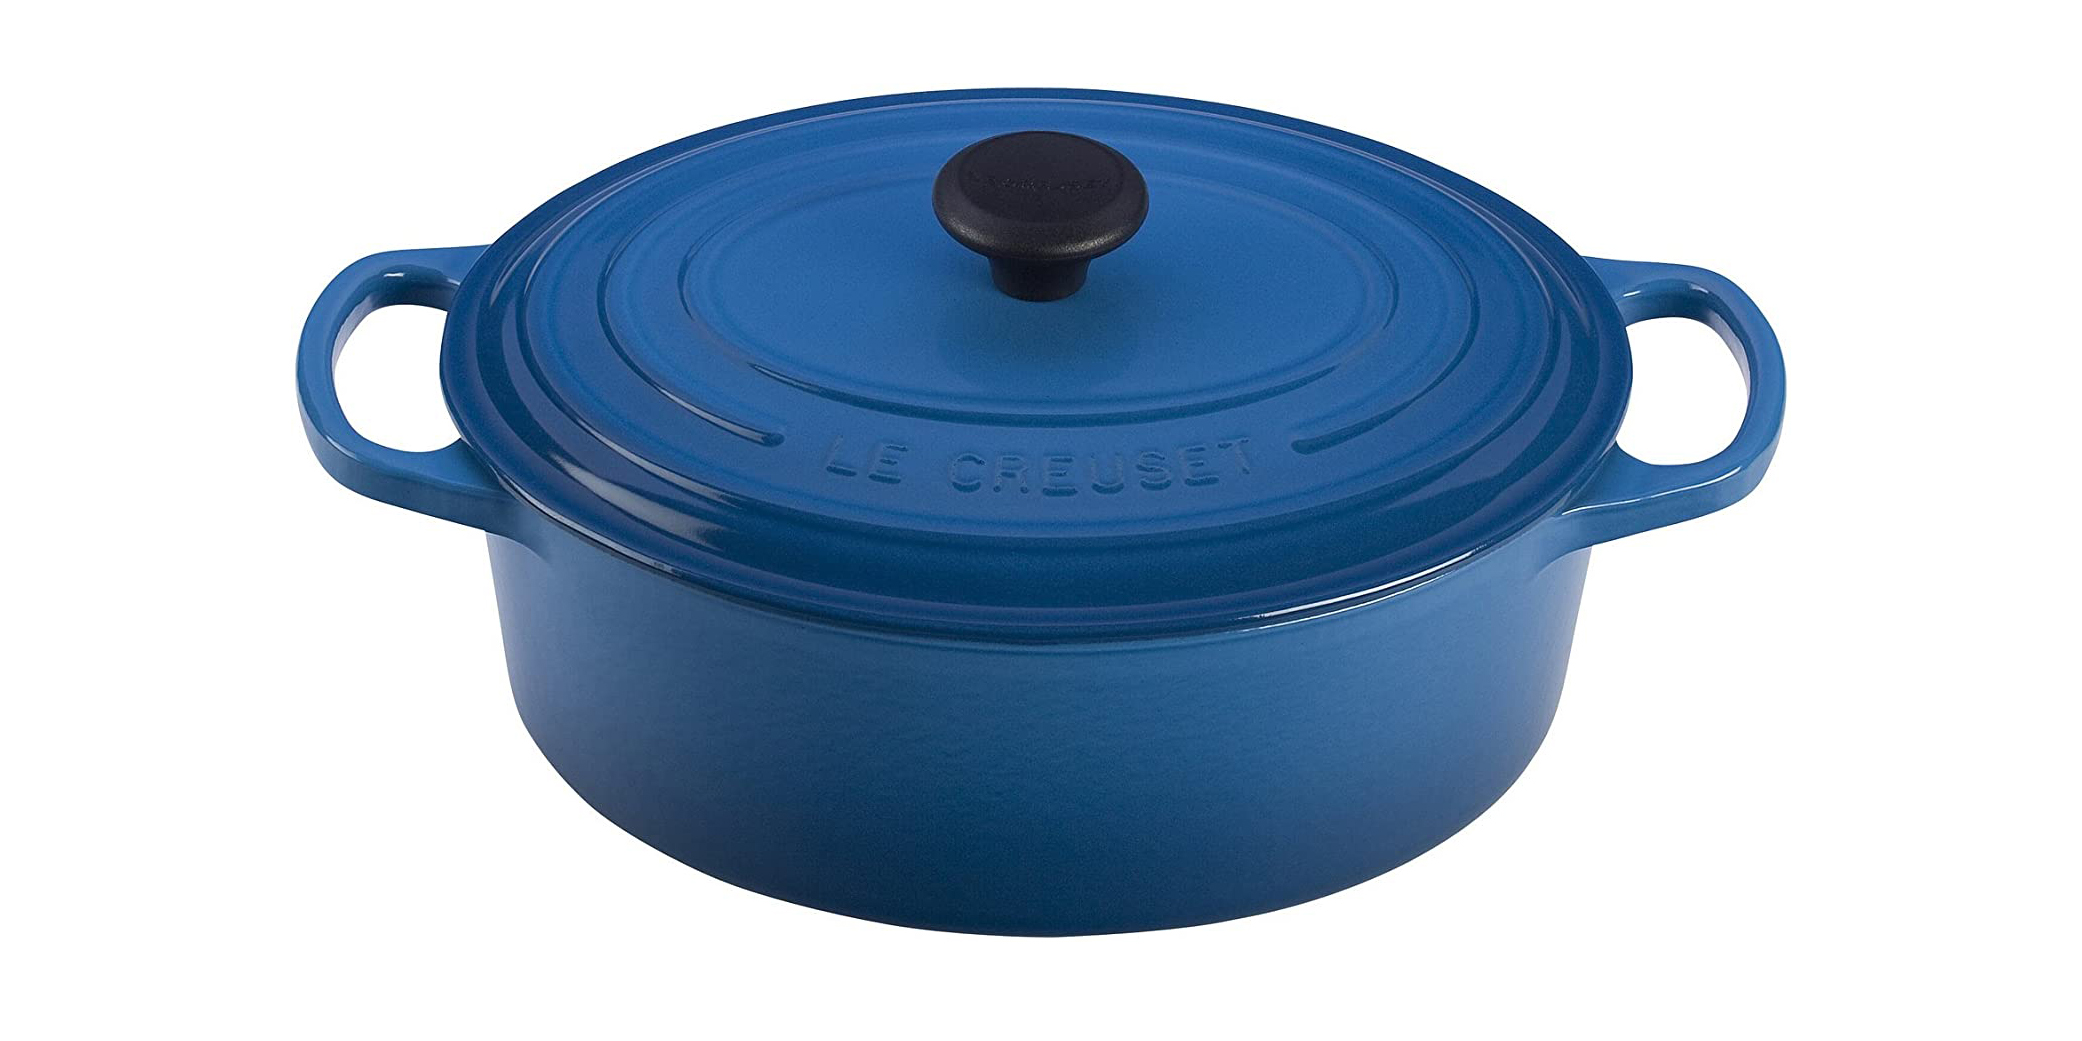 Le Creuset Dutch Ovens see rare Amazon discounts to $160 (All-time low)